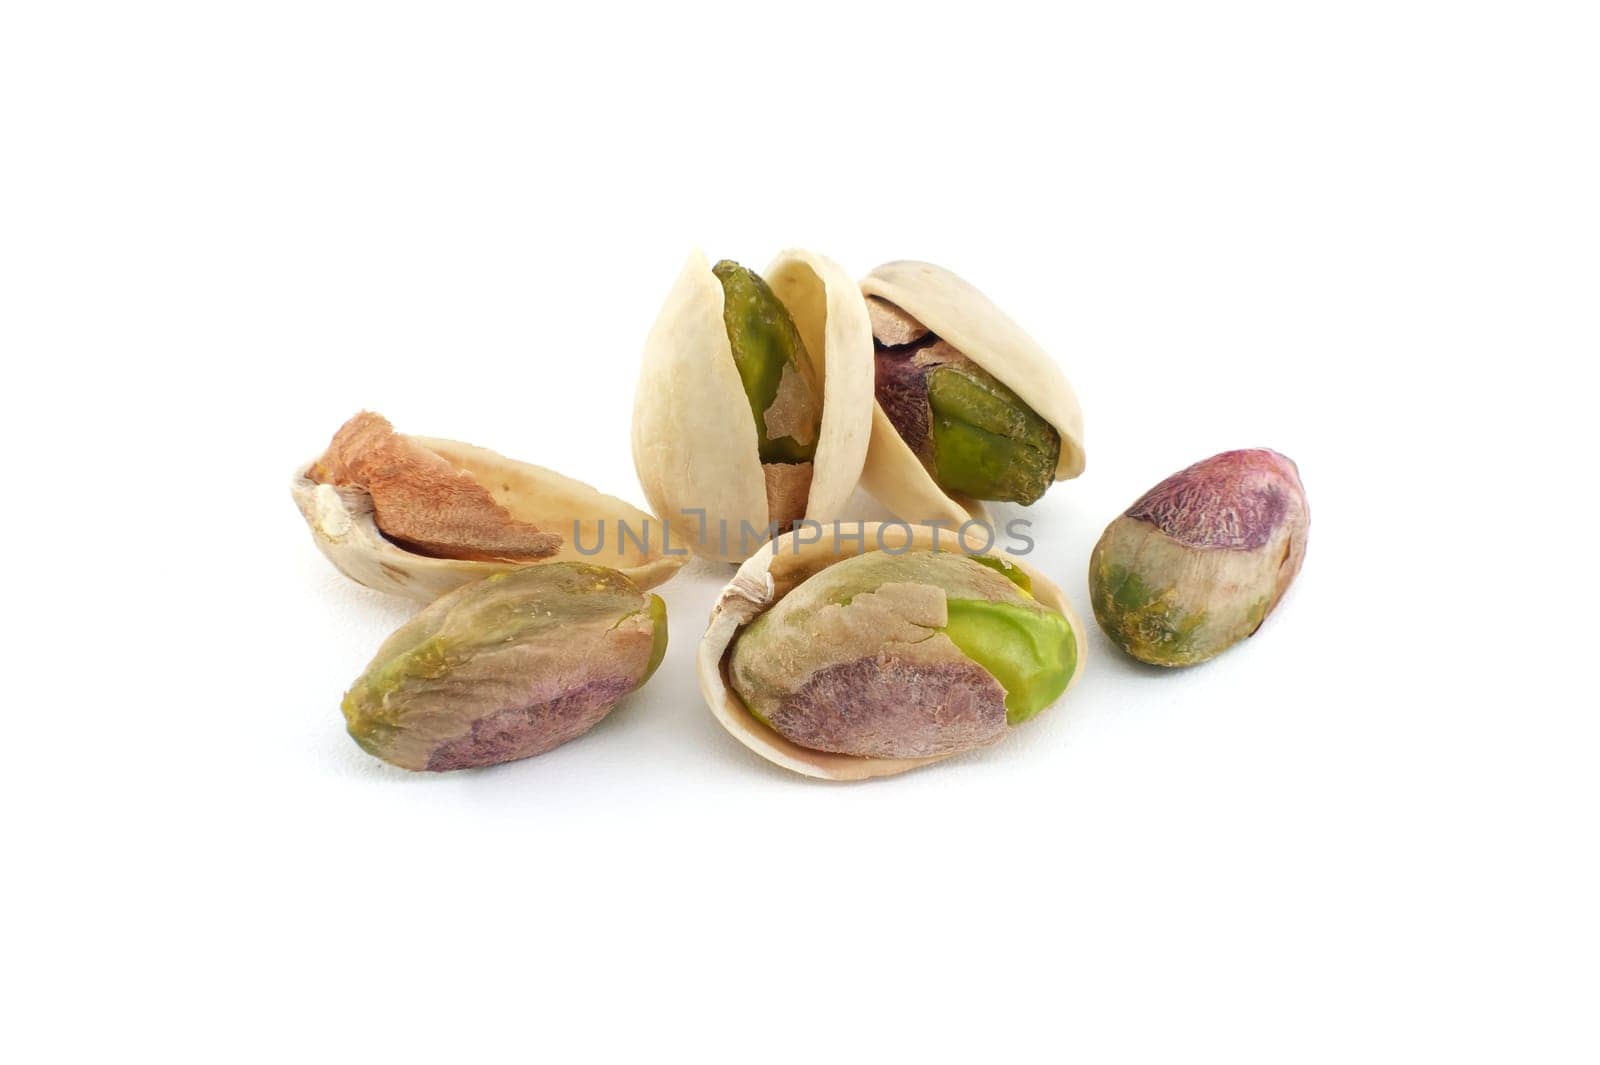 Pistachio nuts in shell isolated on white background by NetPix